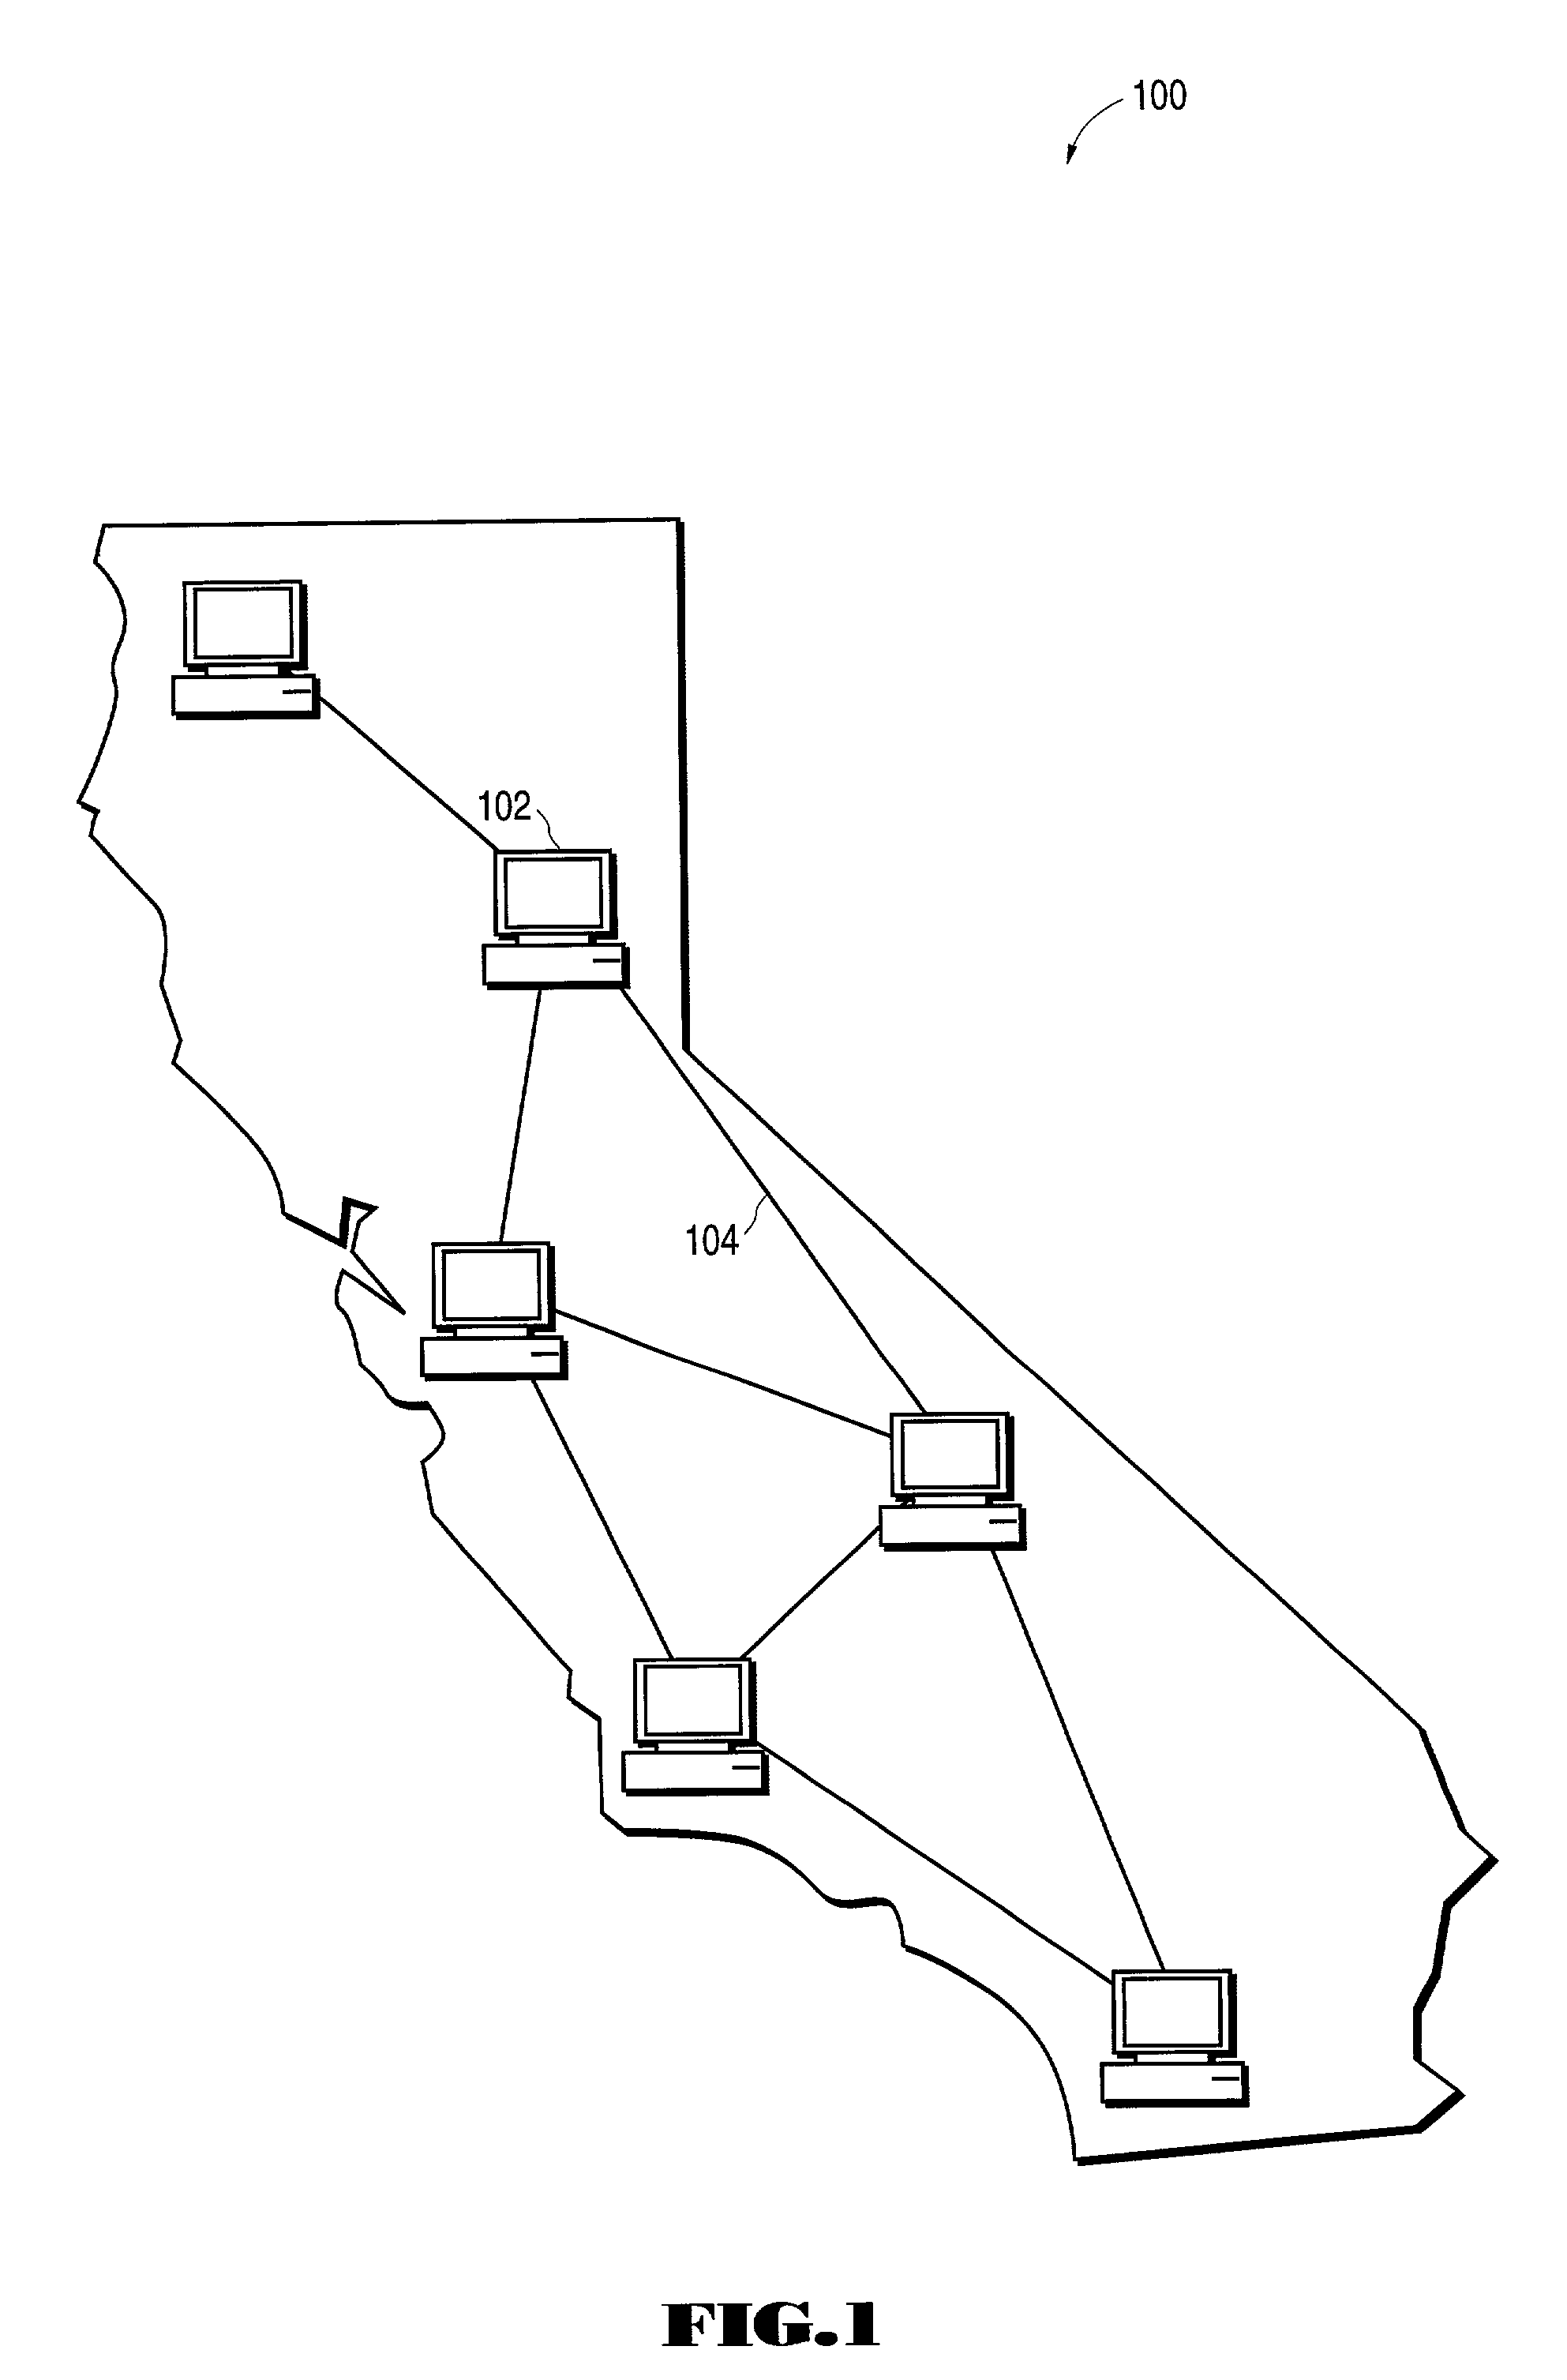 System and method for locating optical network elements and calculating span loss based on geographic coordinate information